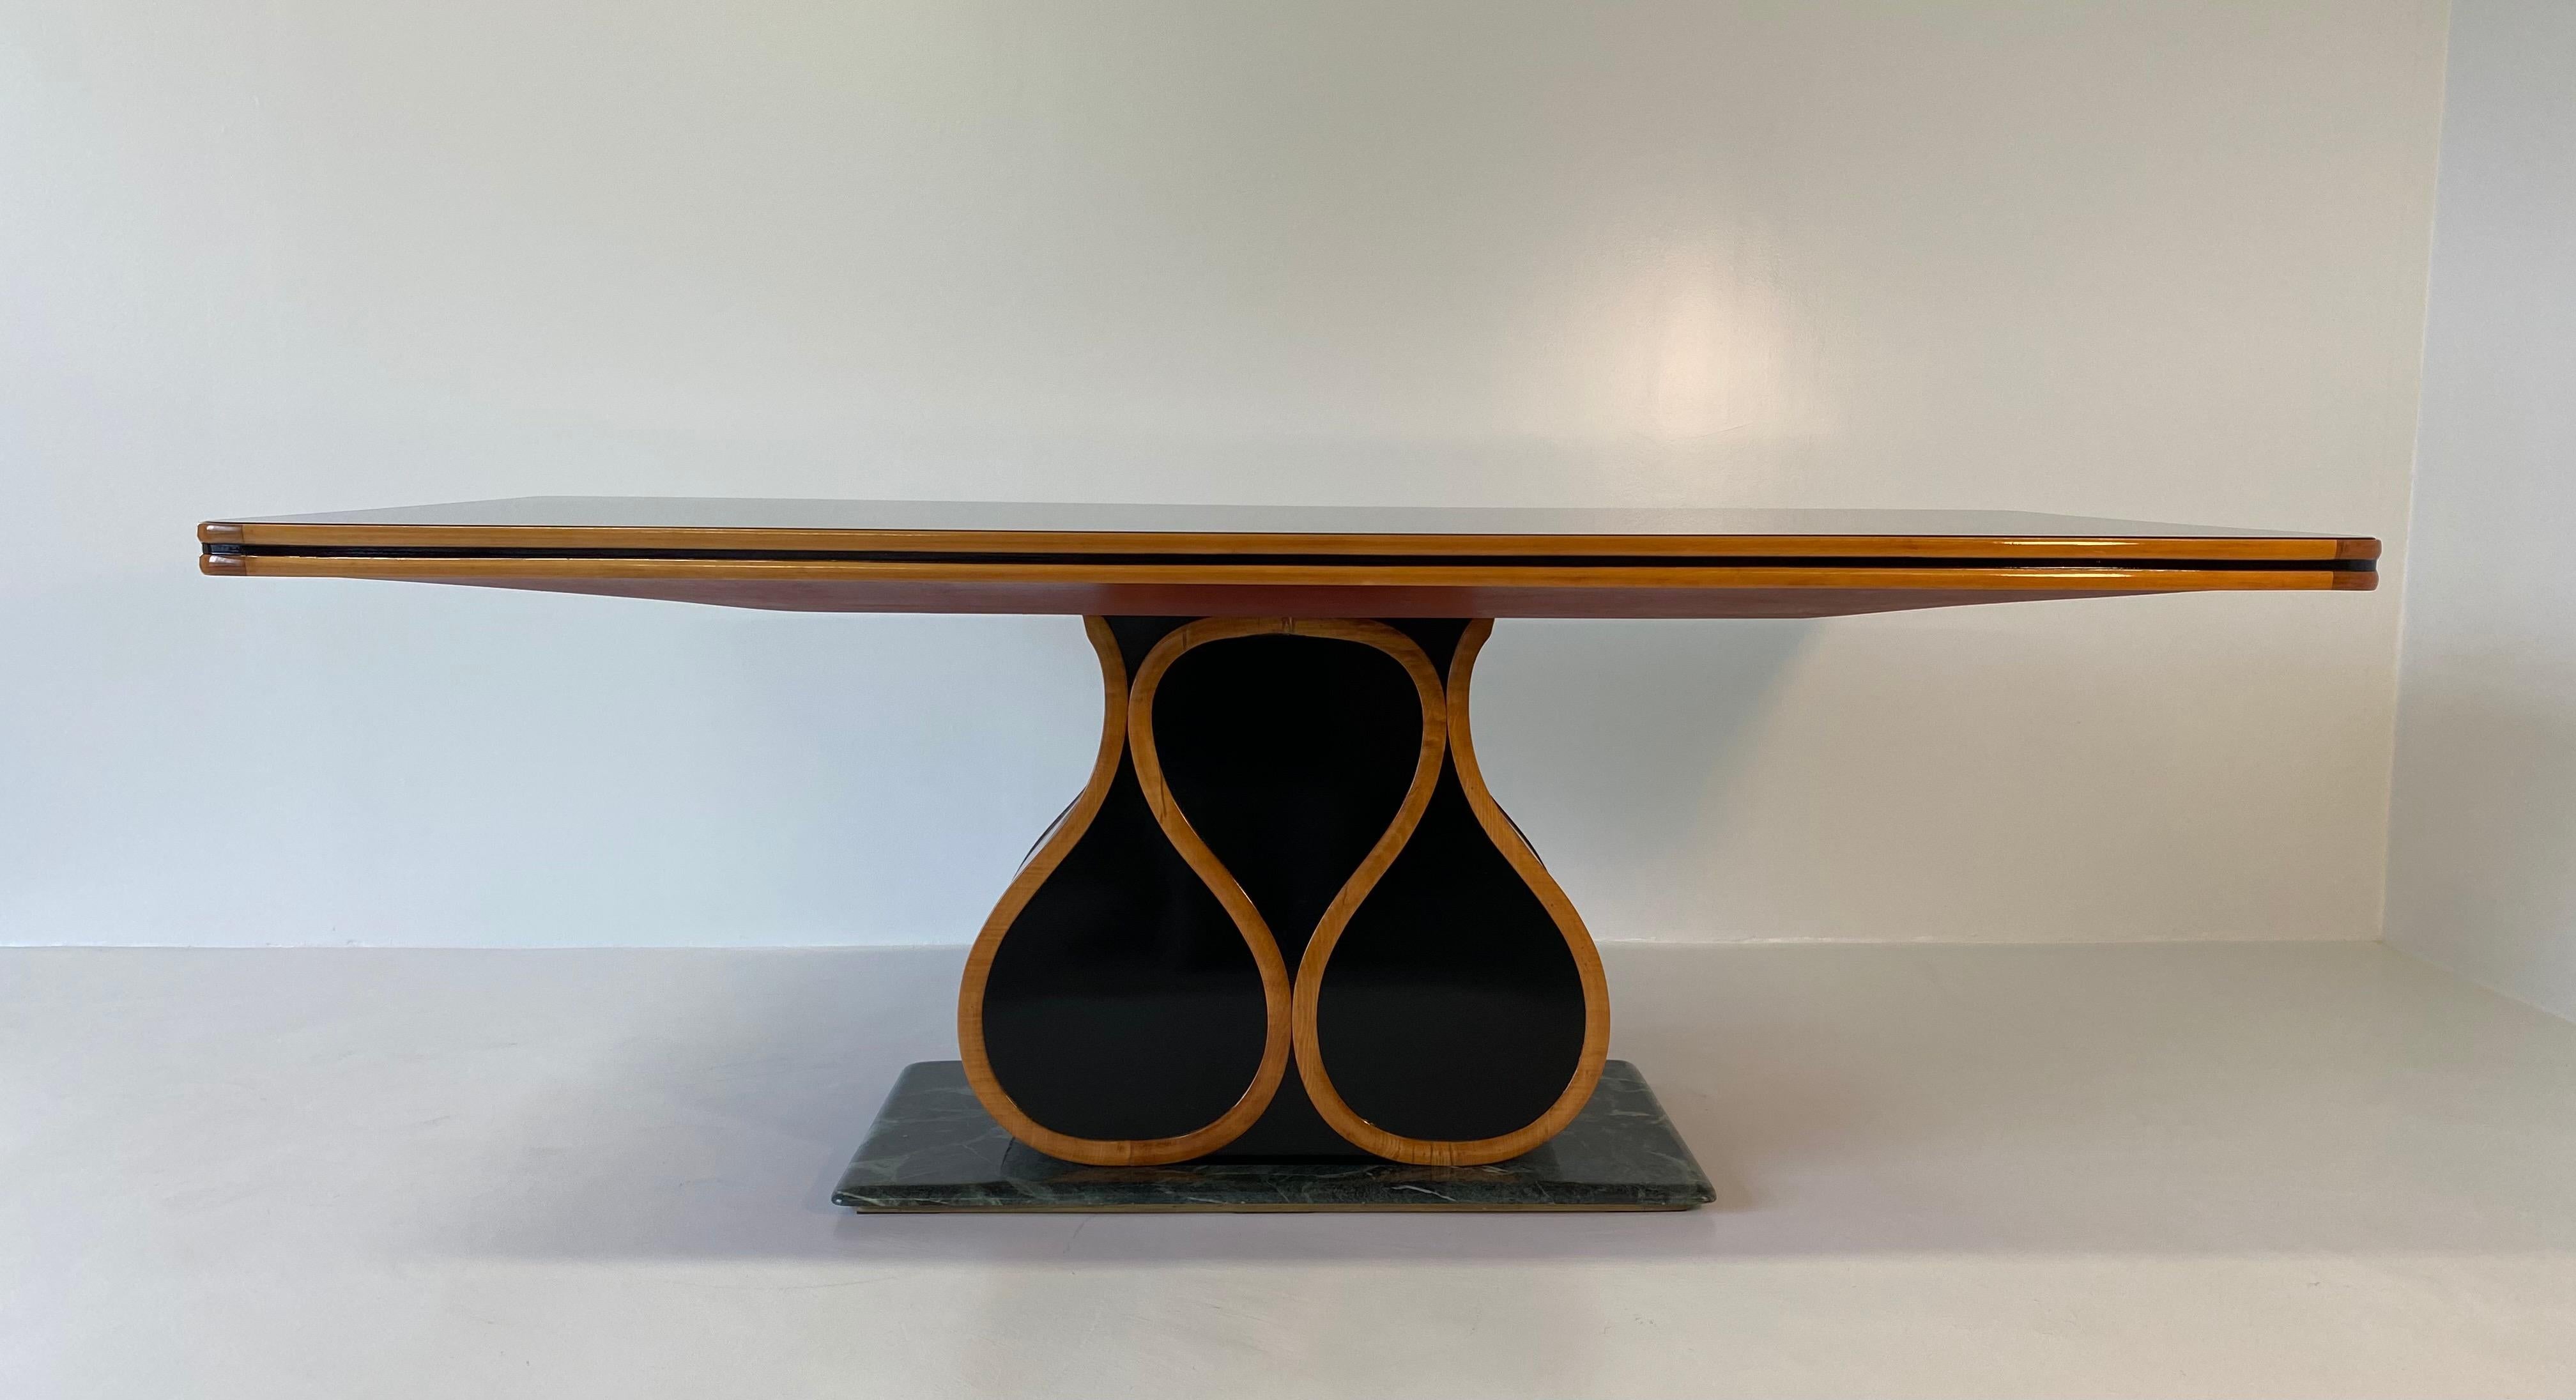 This fine Art Deco table was produced in the 1940s in Cantù (Italy) by Vittorio Dassi for 'Permanente Mobili Cantù'.
The table is in black lacquered wood with profiles and decorations in solid maple wood.
The top is in original black glass while